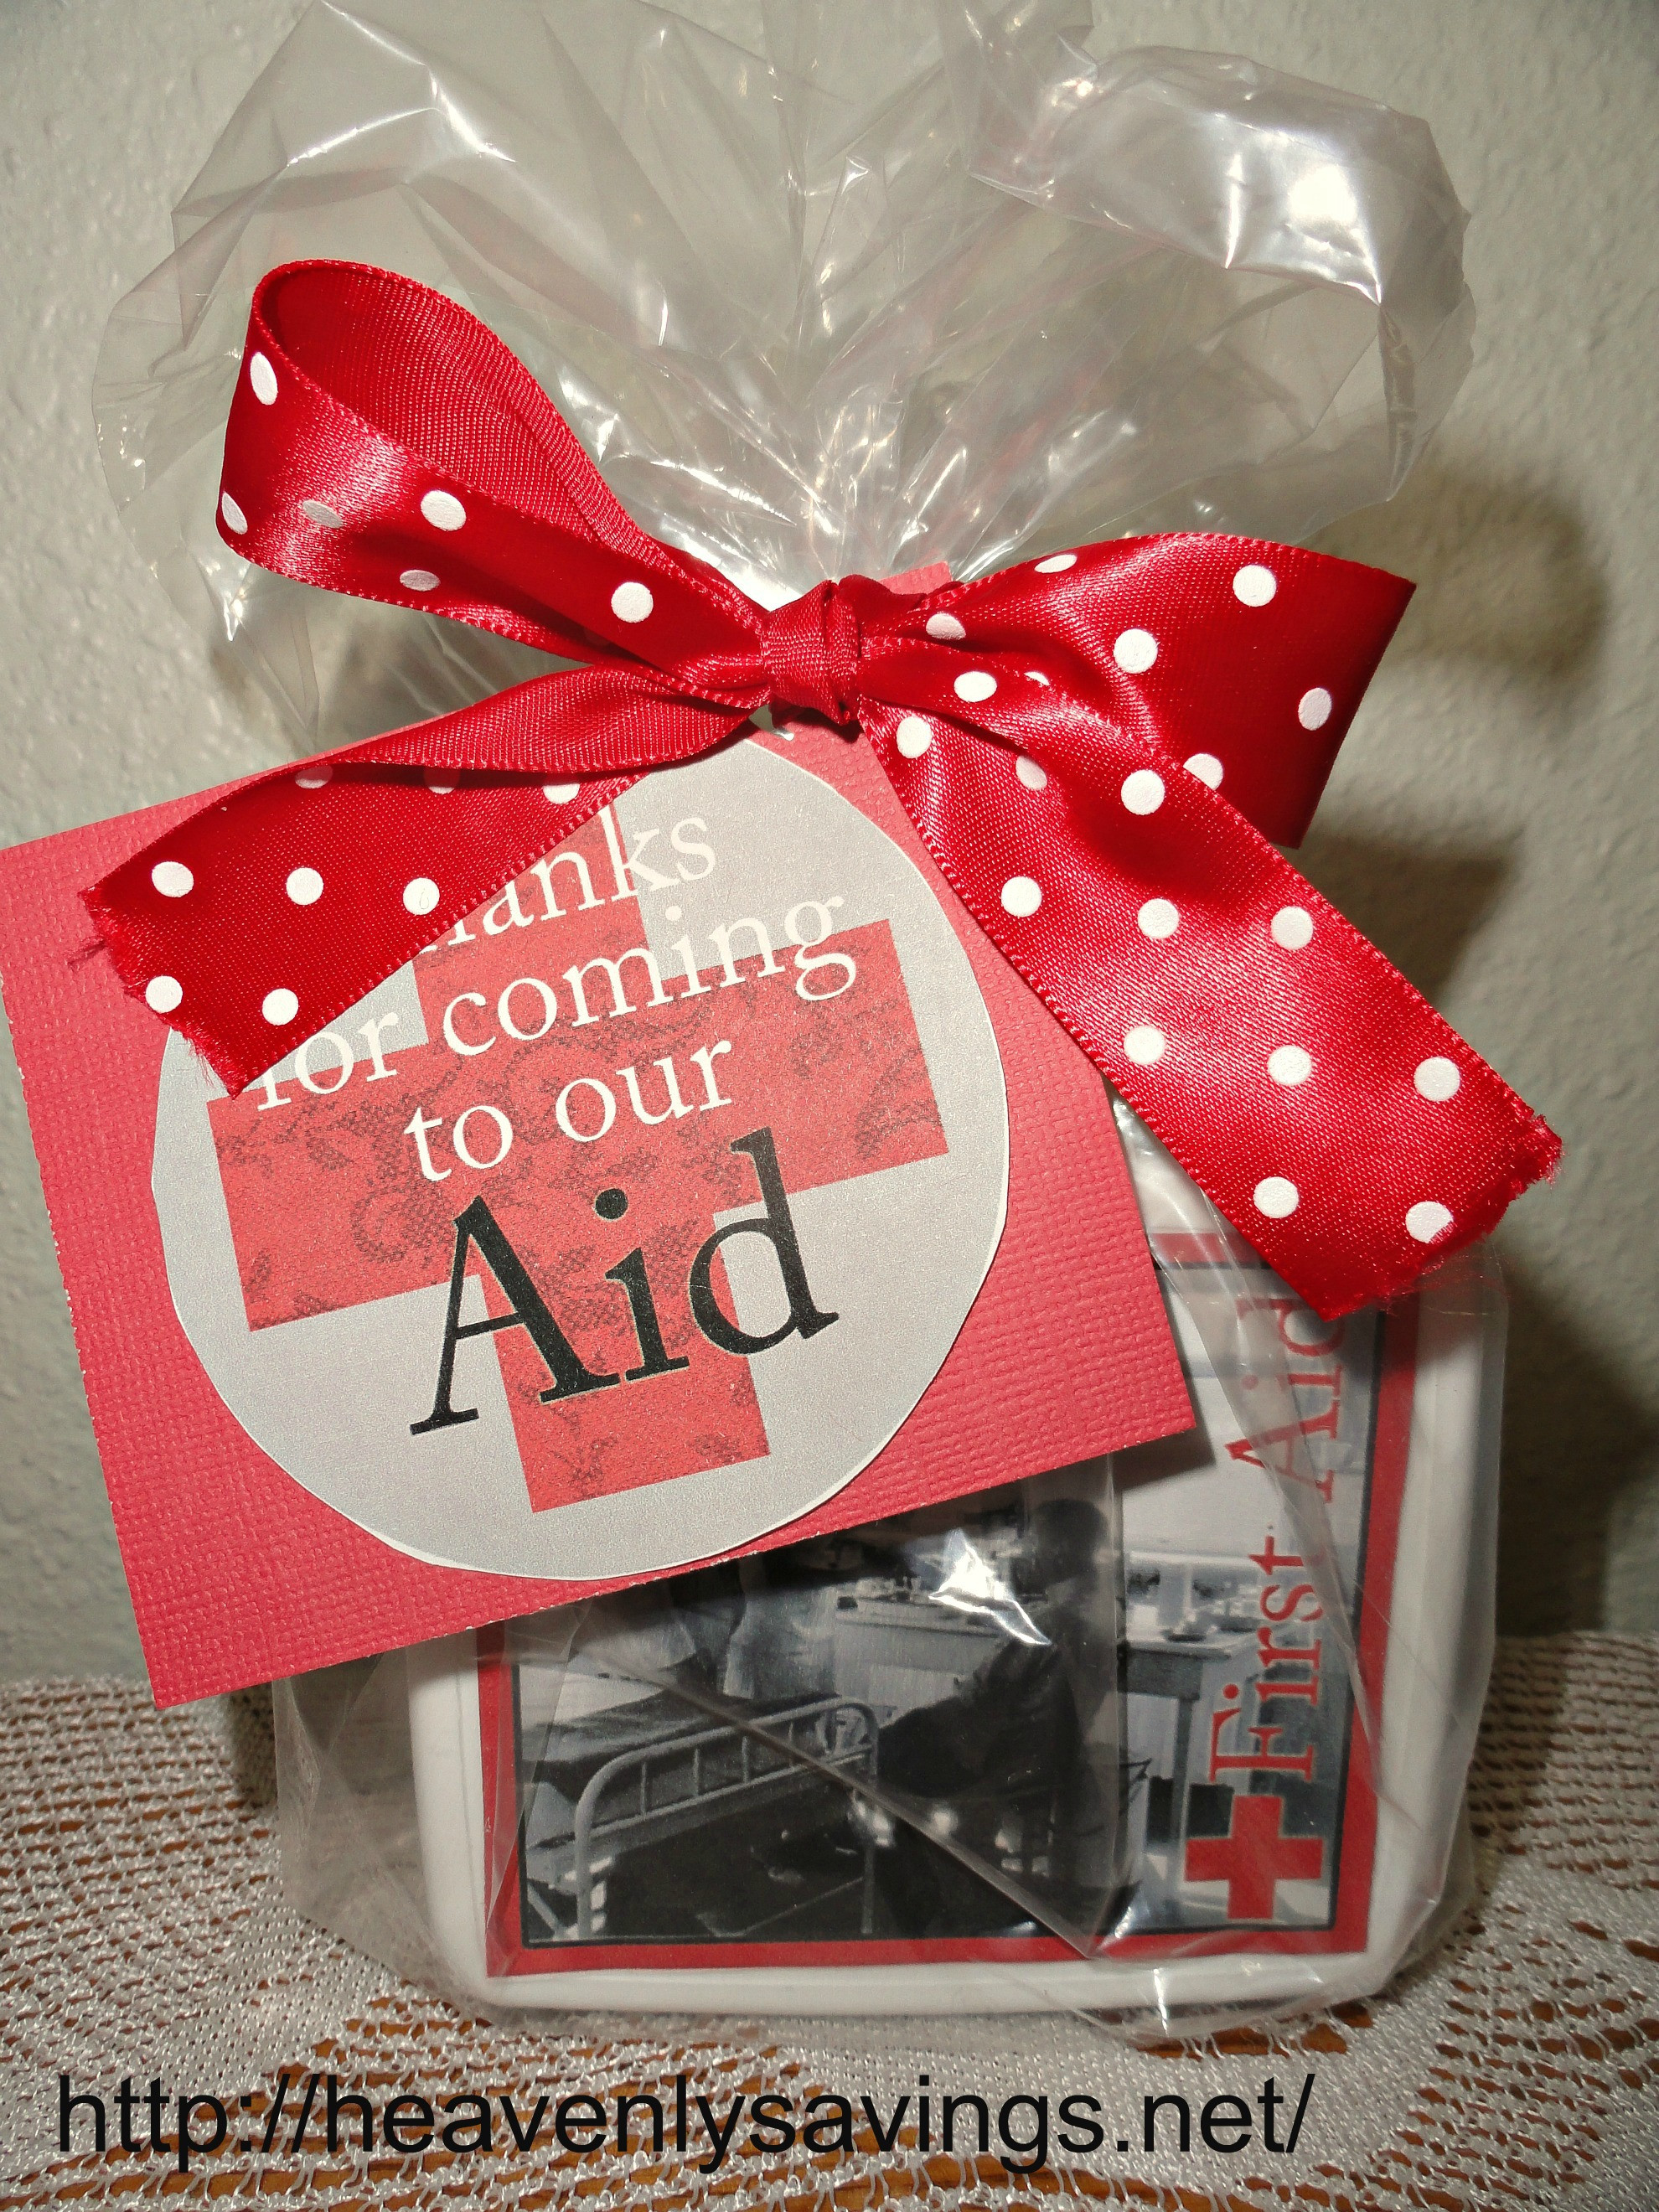 Homemade Thank You Gift Ideas
 Cheap and Easy Thank You Gift